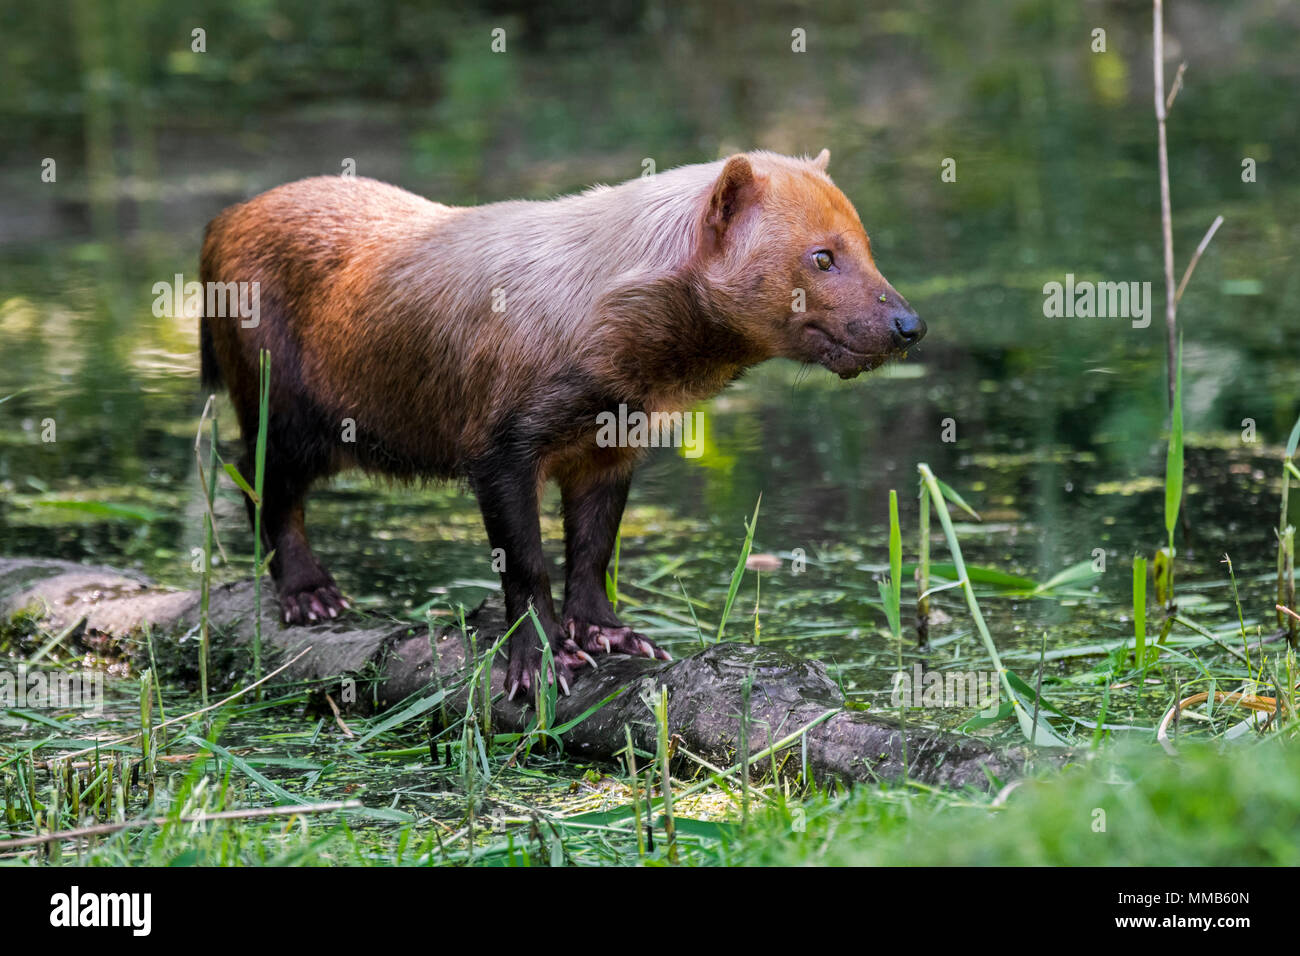 Bush dog (Speothos venaticus) canid native to Central and South America, standing on log in stream Stock Photo